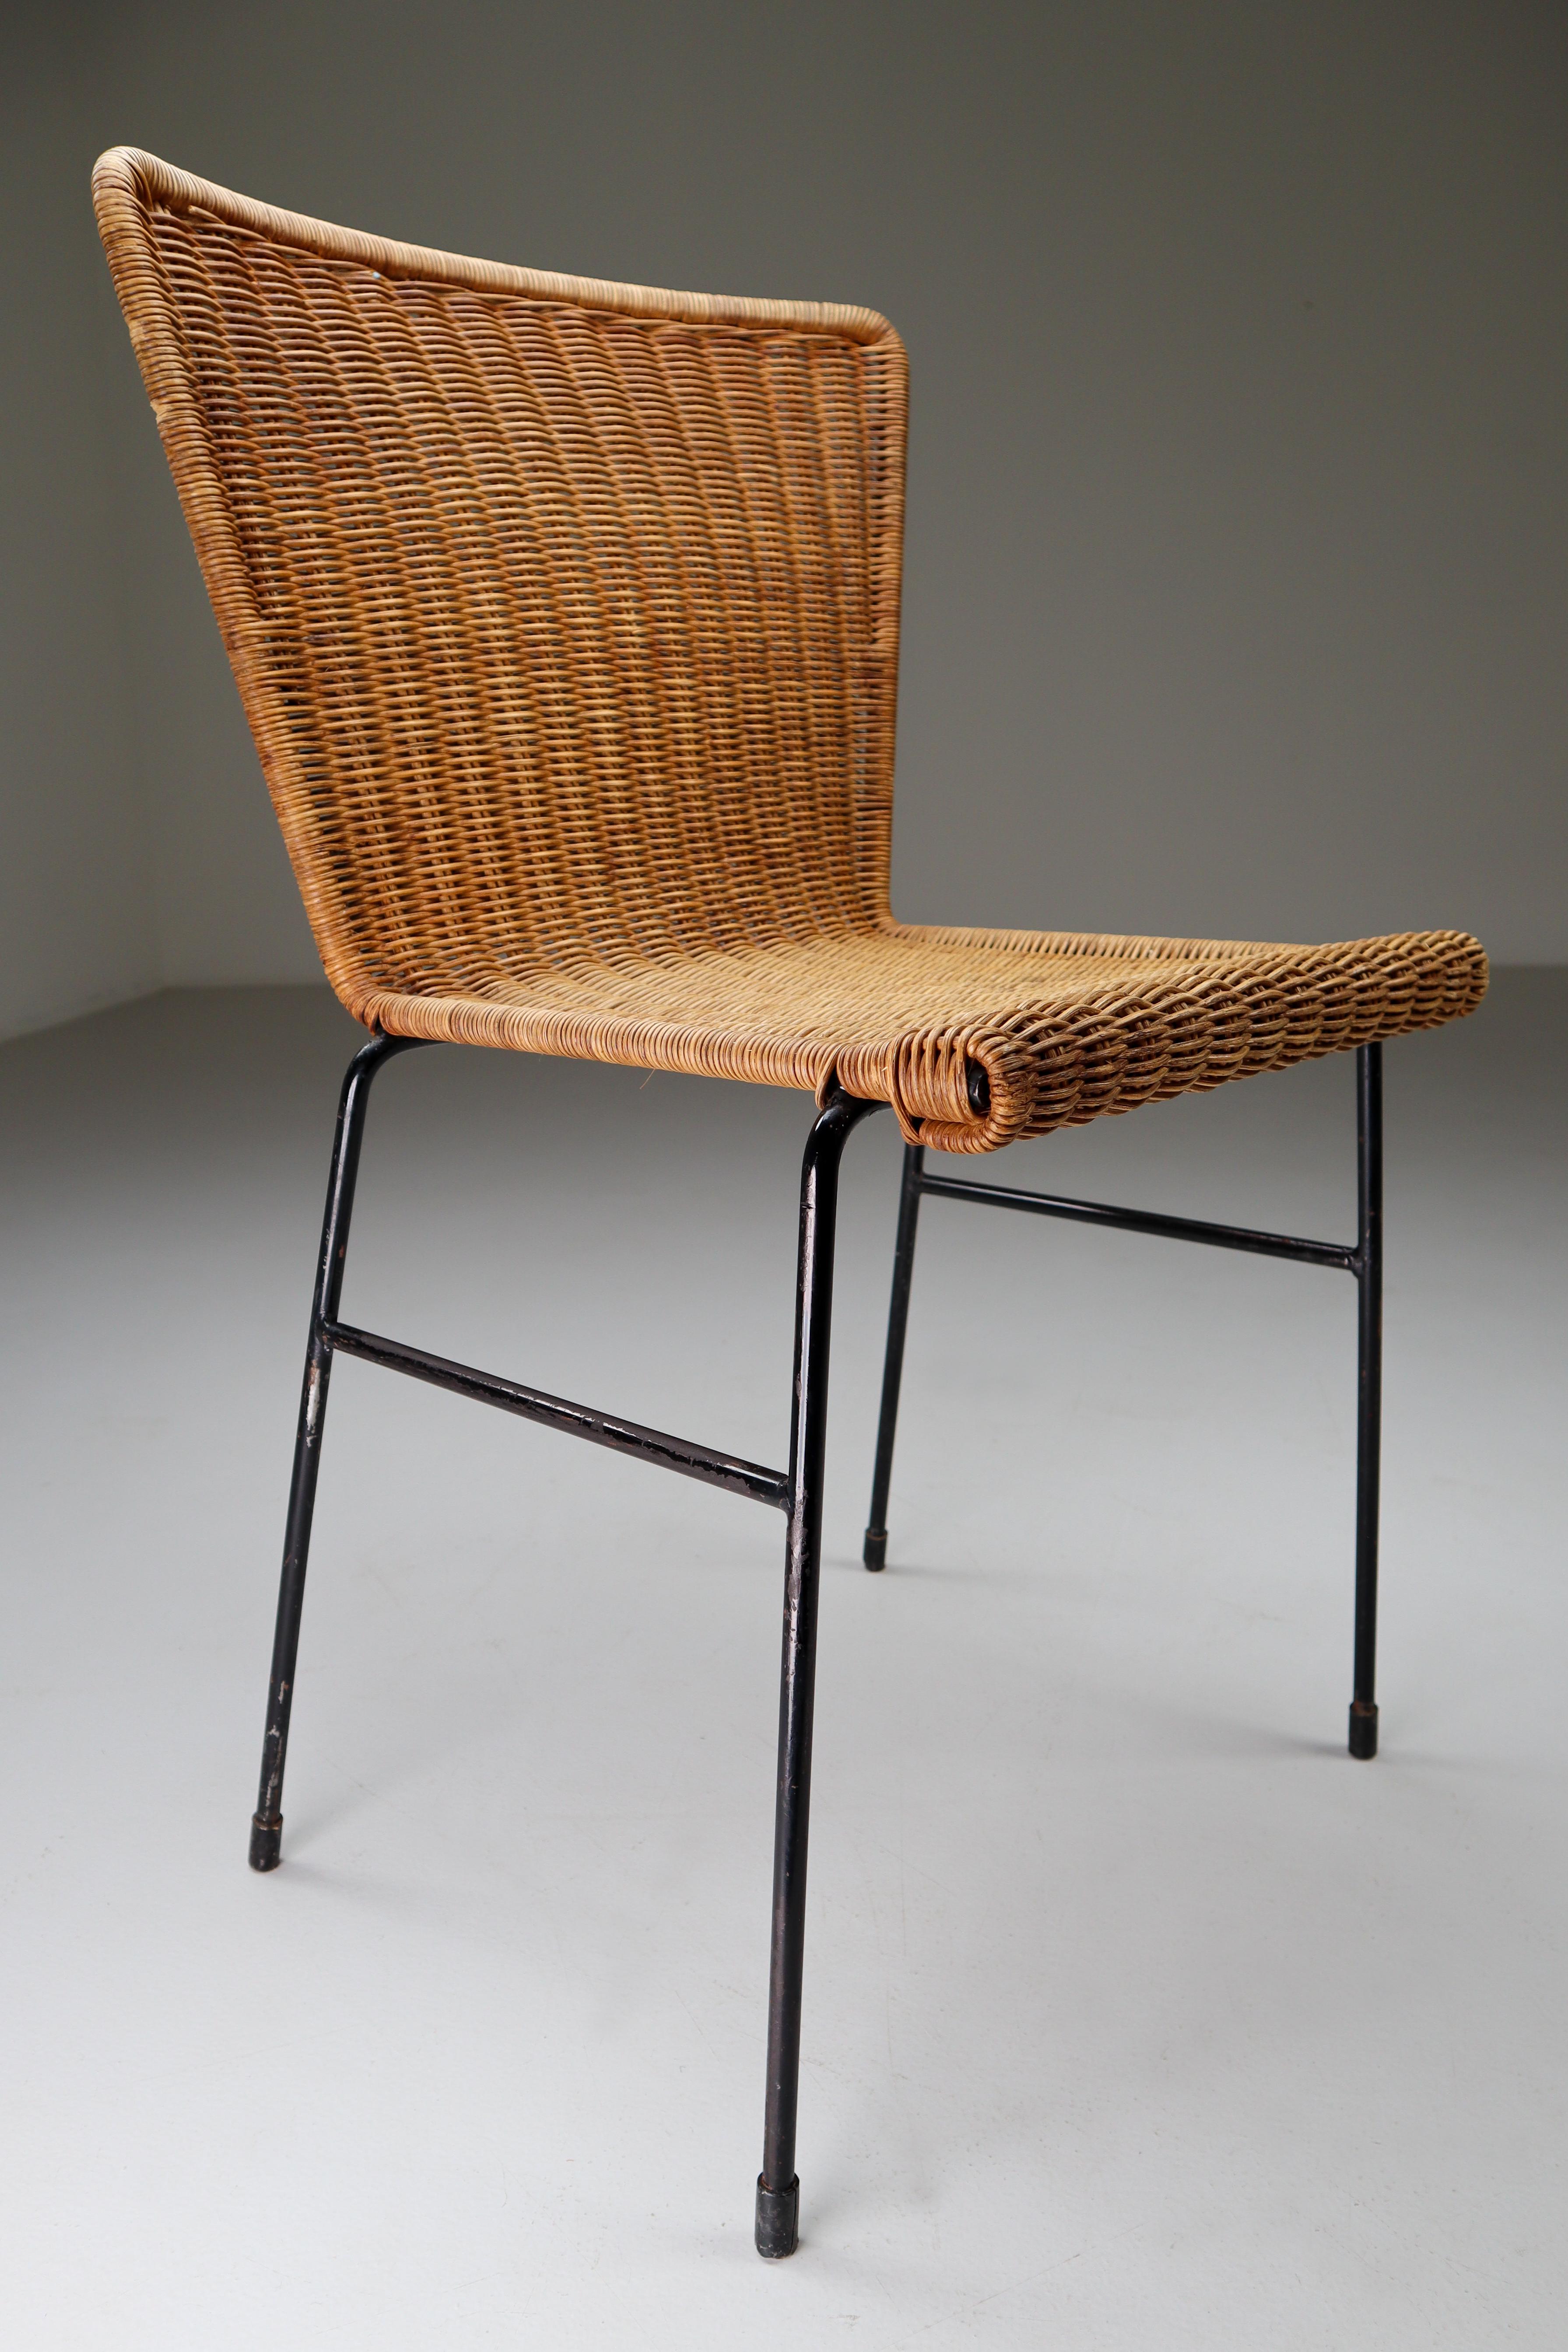 Mid-Century Modern Patinated Metal Framed chairs with Woven Wicker Seat, The Netherlands, 1950